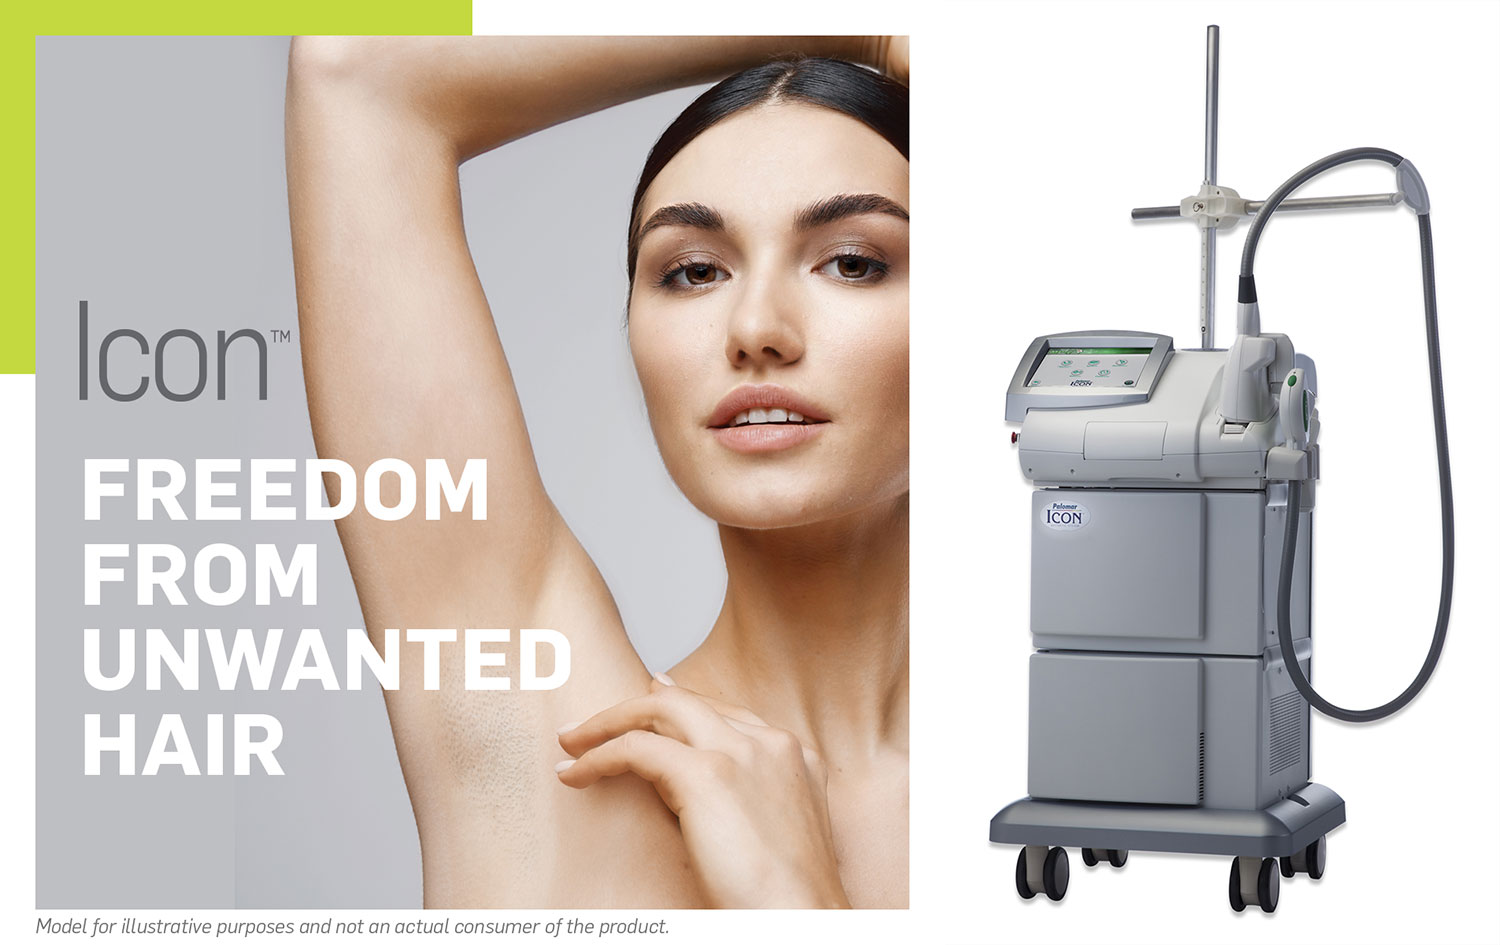 ICON Laser Hair Removal